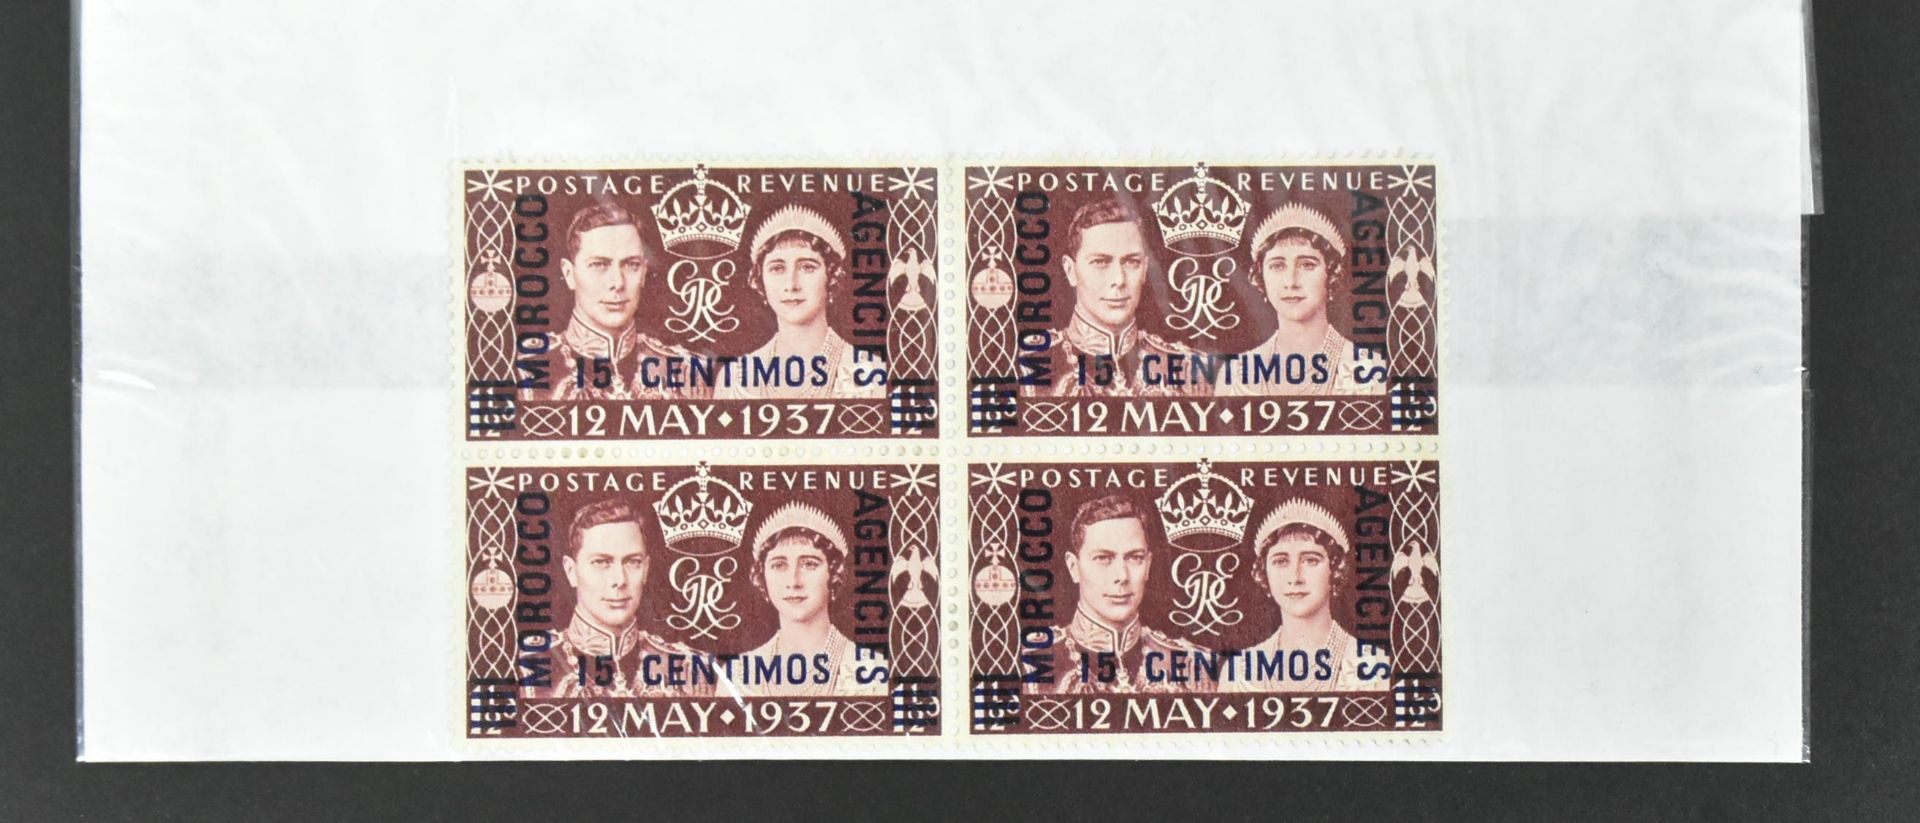 COLLECTION BRITISH UNCIRCULATED BANK NOTES - Image 13 of 61